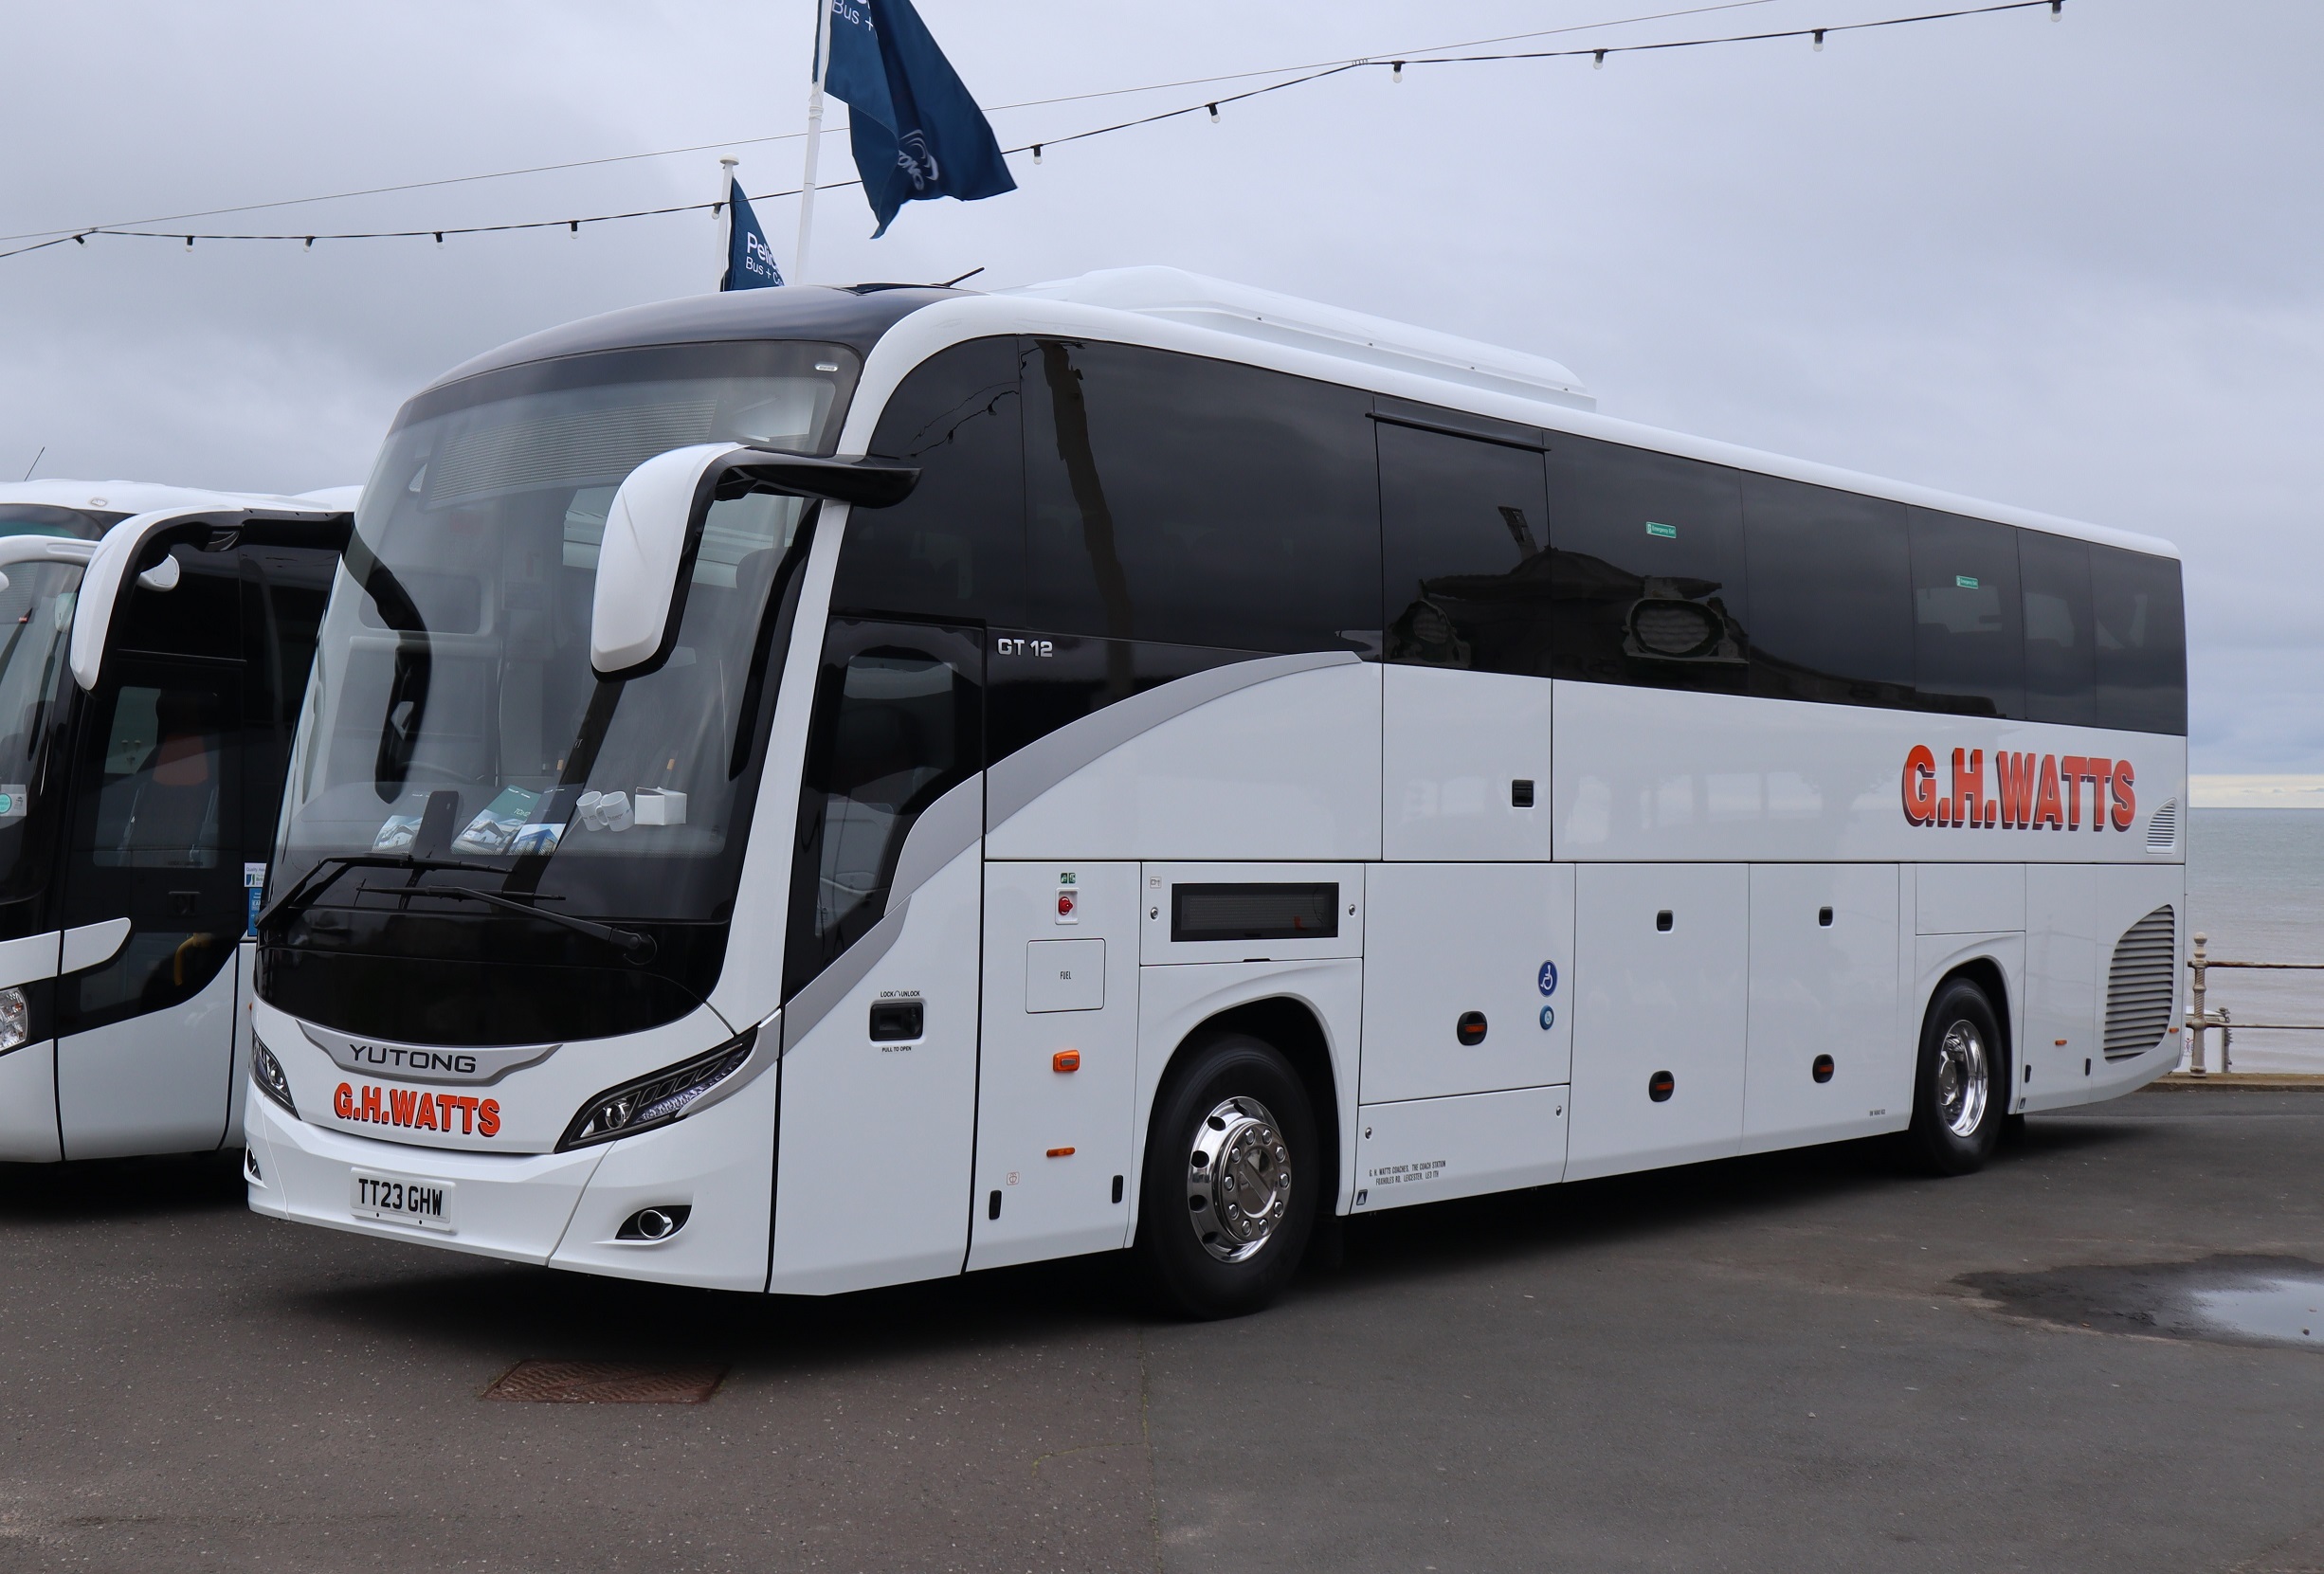 Yutong GT12 for GH Watts Coaches